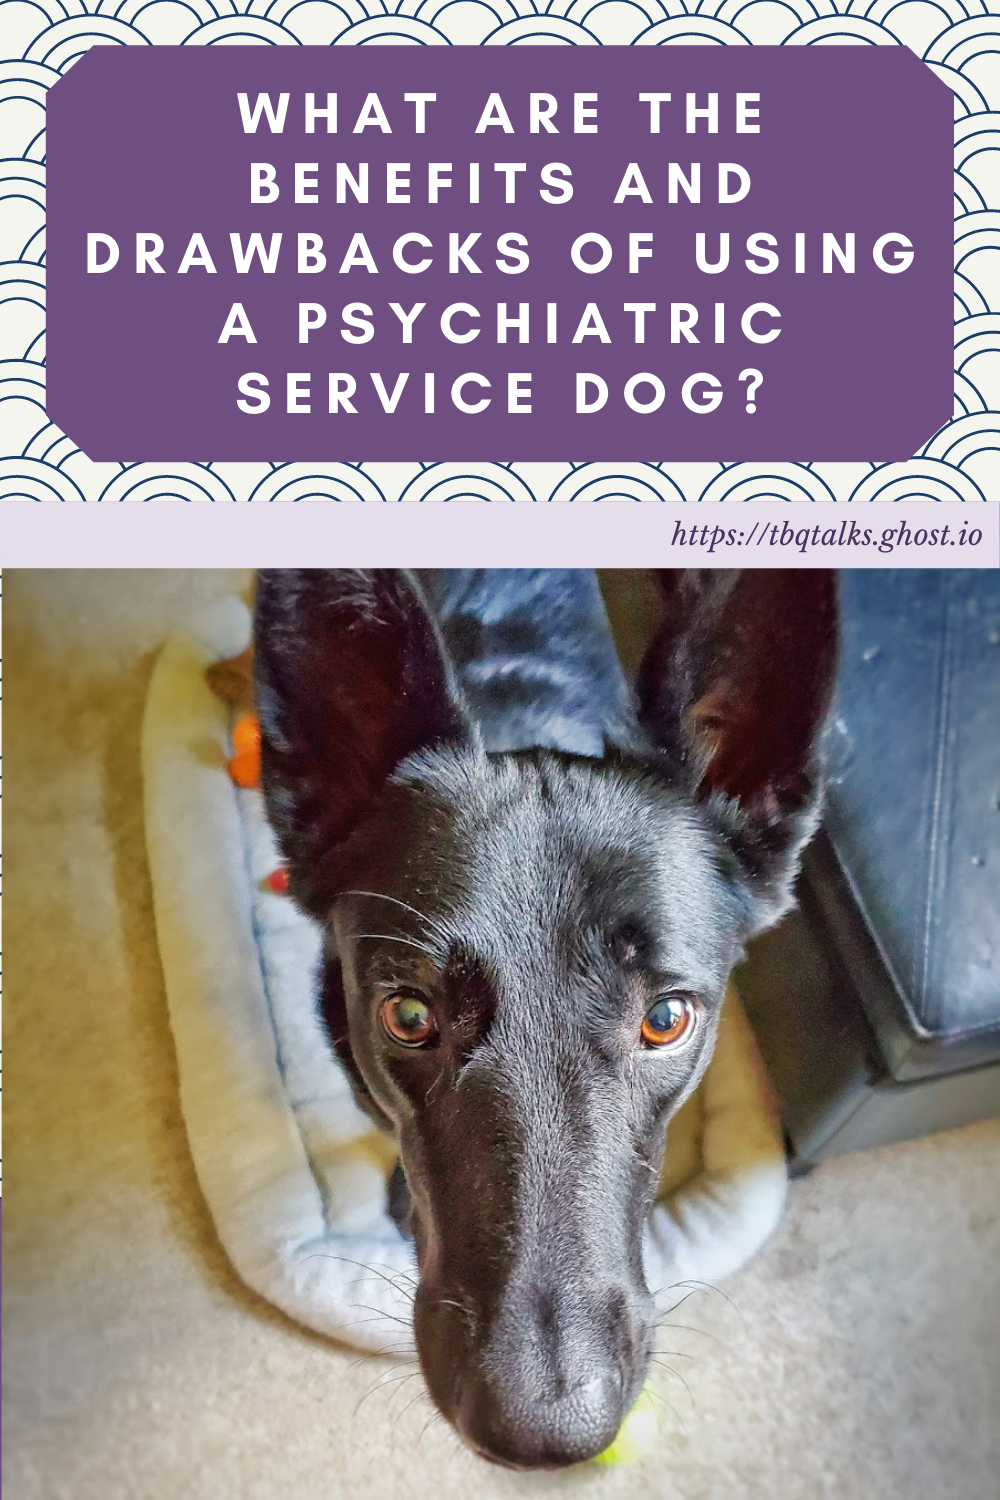 What Are The Benefits And Drawbacks of Using a Psychiatric Service Dog?